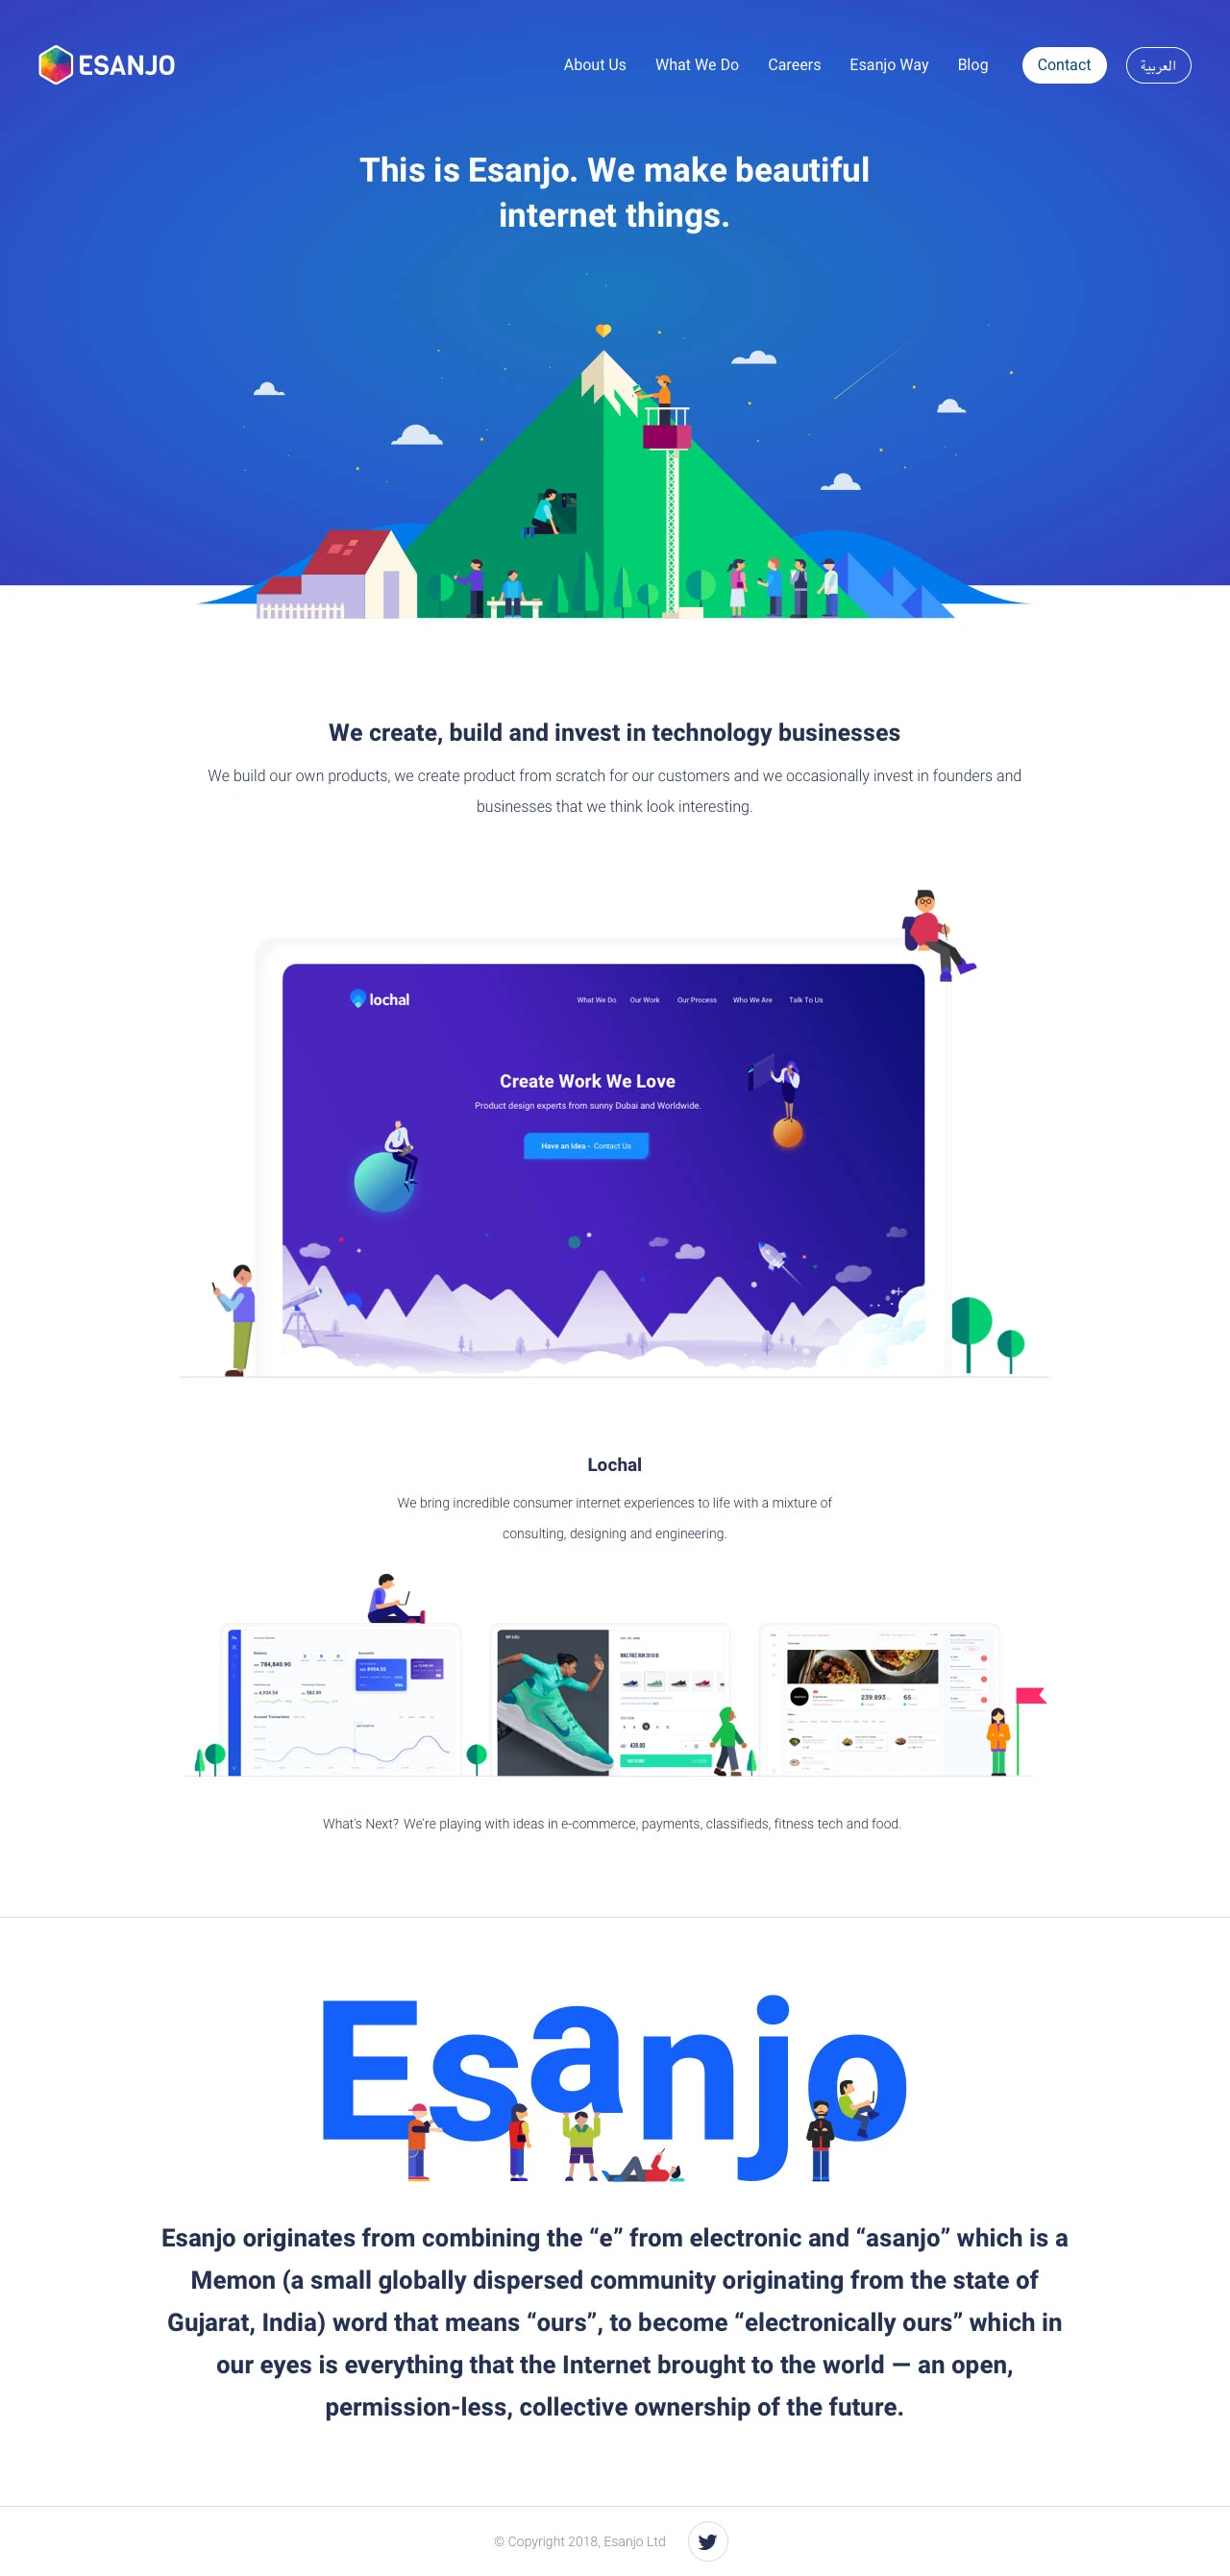 Esanjo Landing Page Example: We create, build and invest in beautiful technology businesses